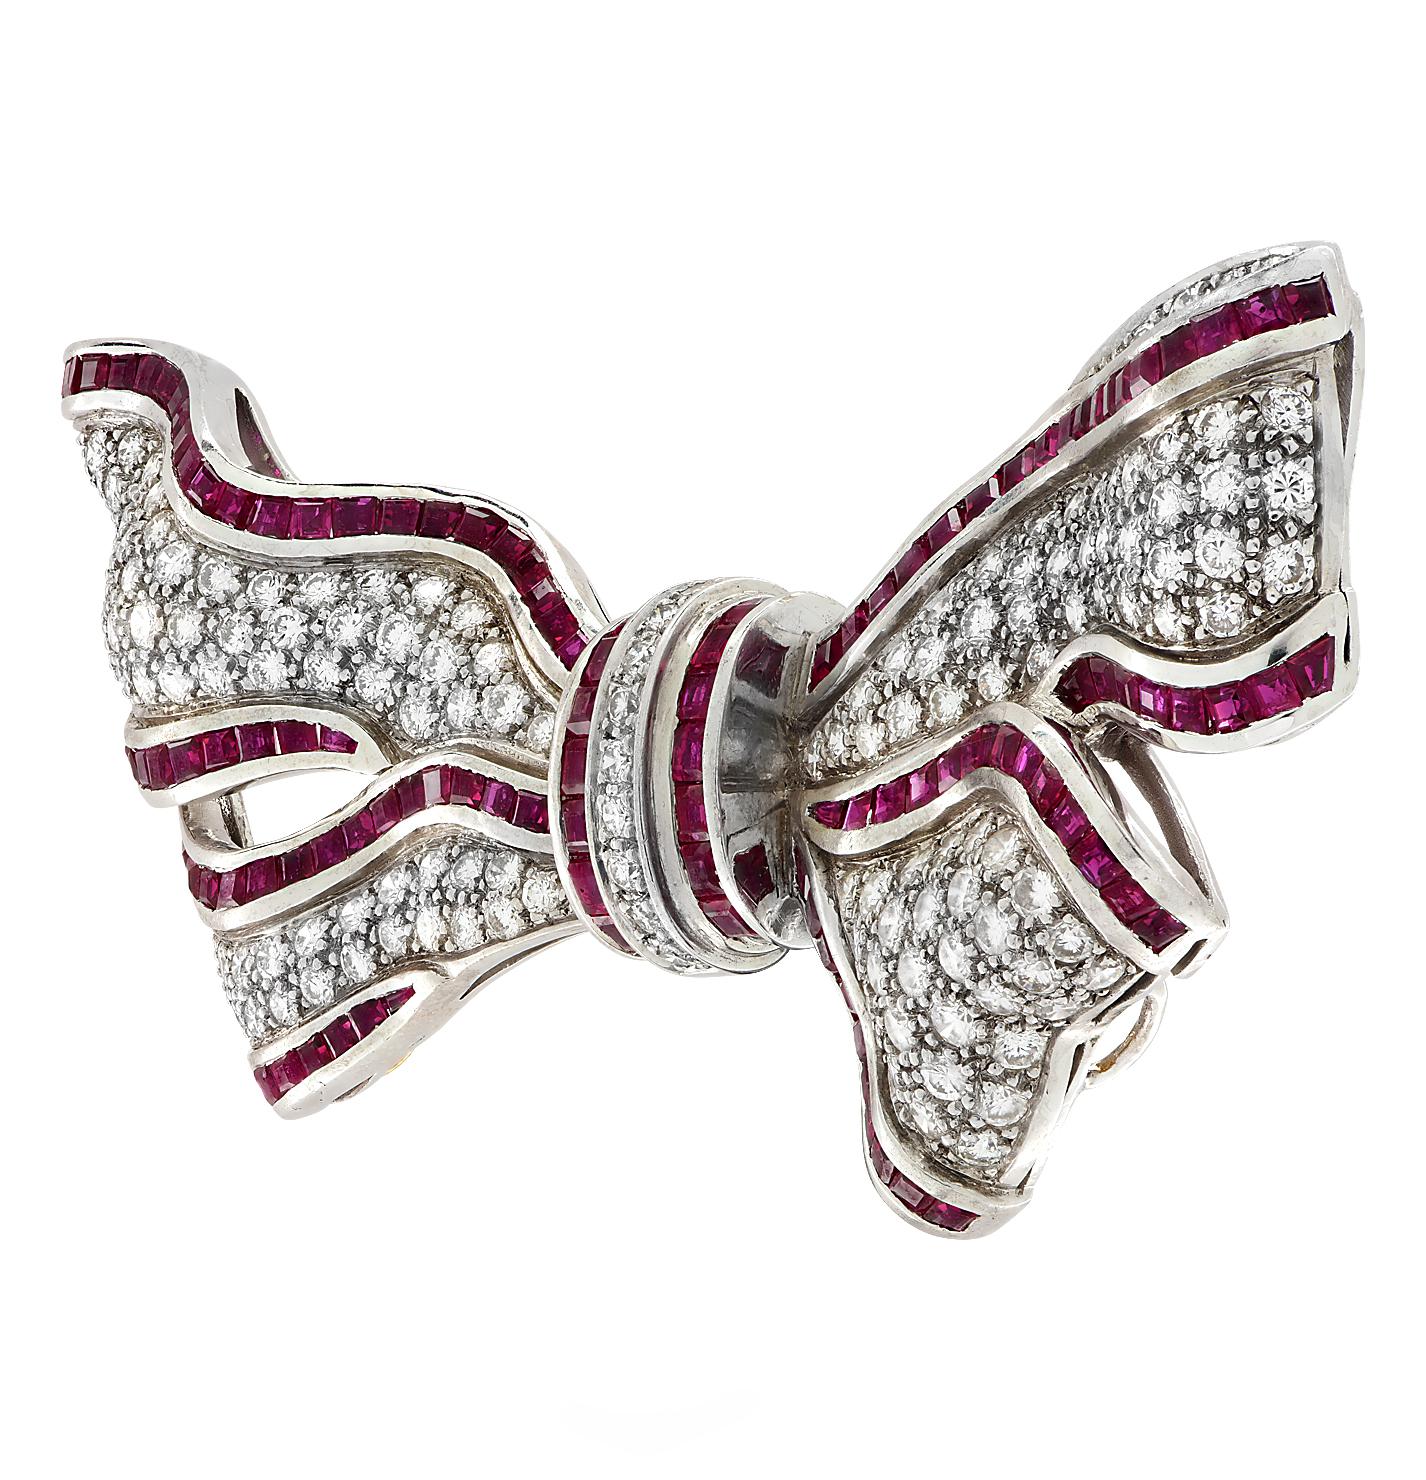 Delightful brooch pin crafted in 18 karat white gold featuring round brilliant cut diamonds weighing approximately 5.33 carats total G color VS clarity, trimmed with 105 square cut rubies weighing approximately 4 carats total, fashioned into a bow.